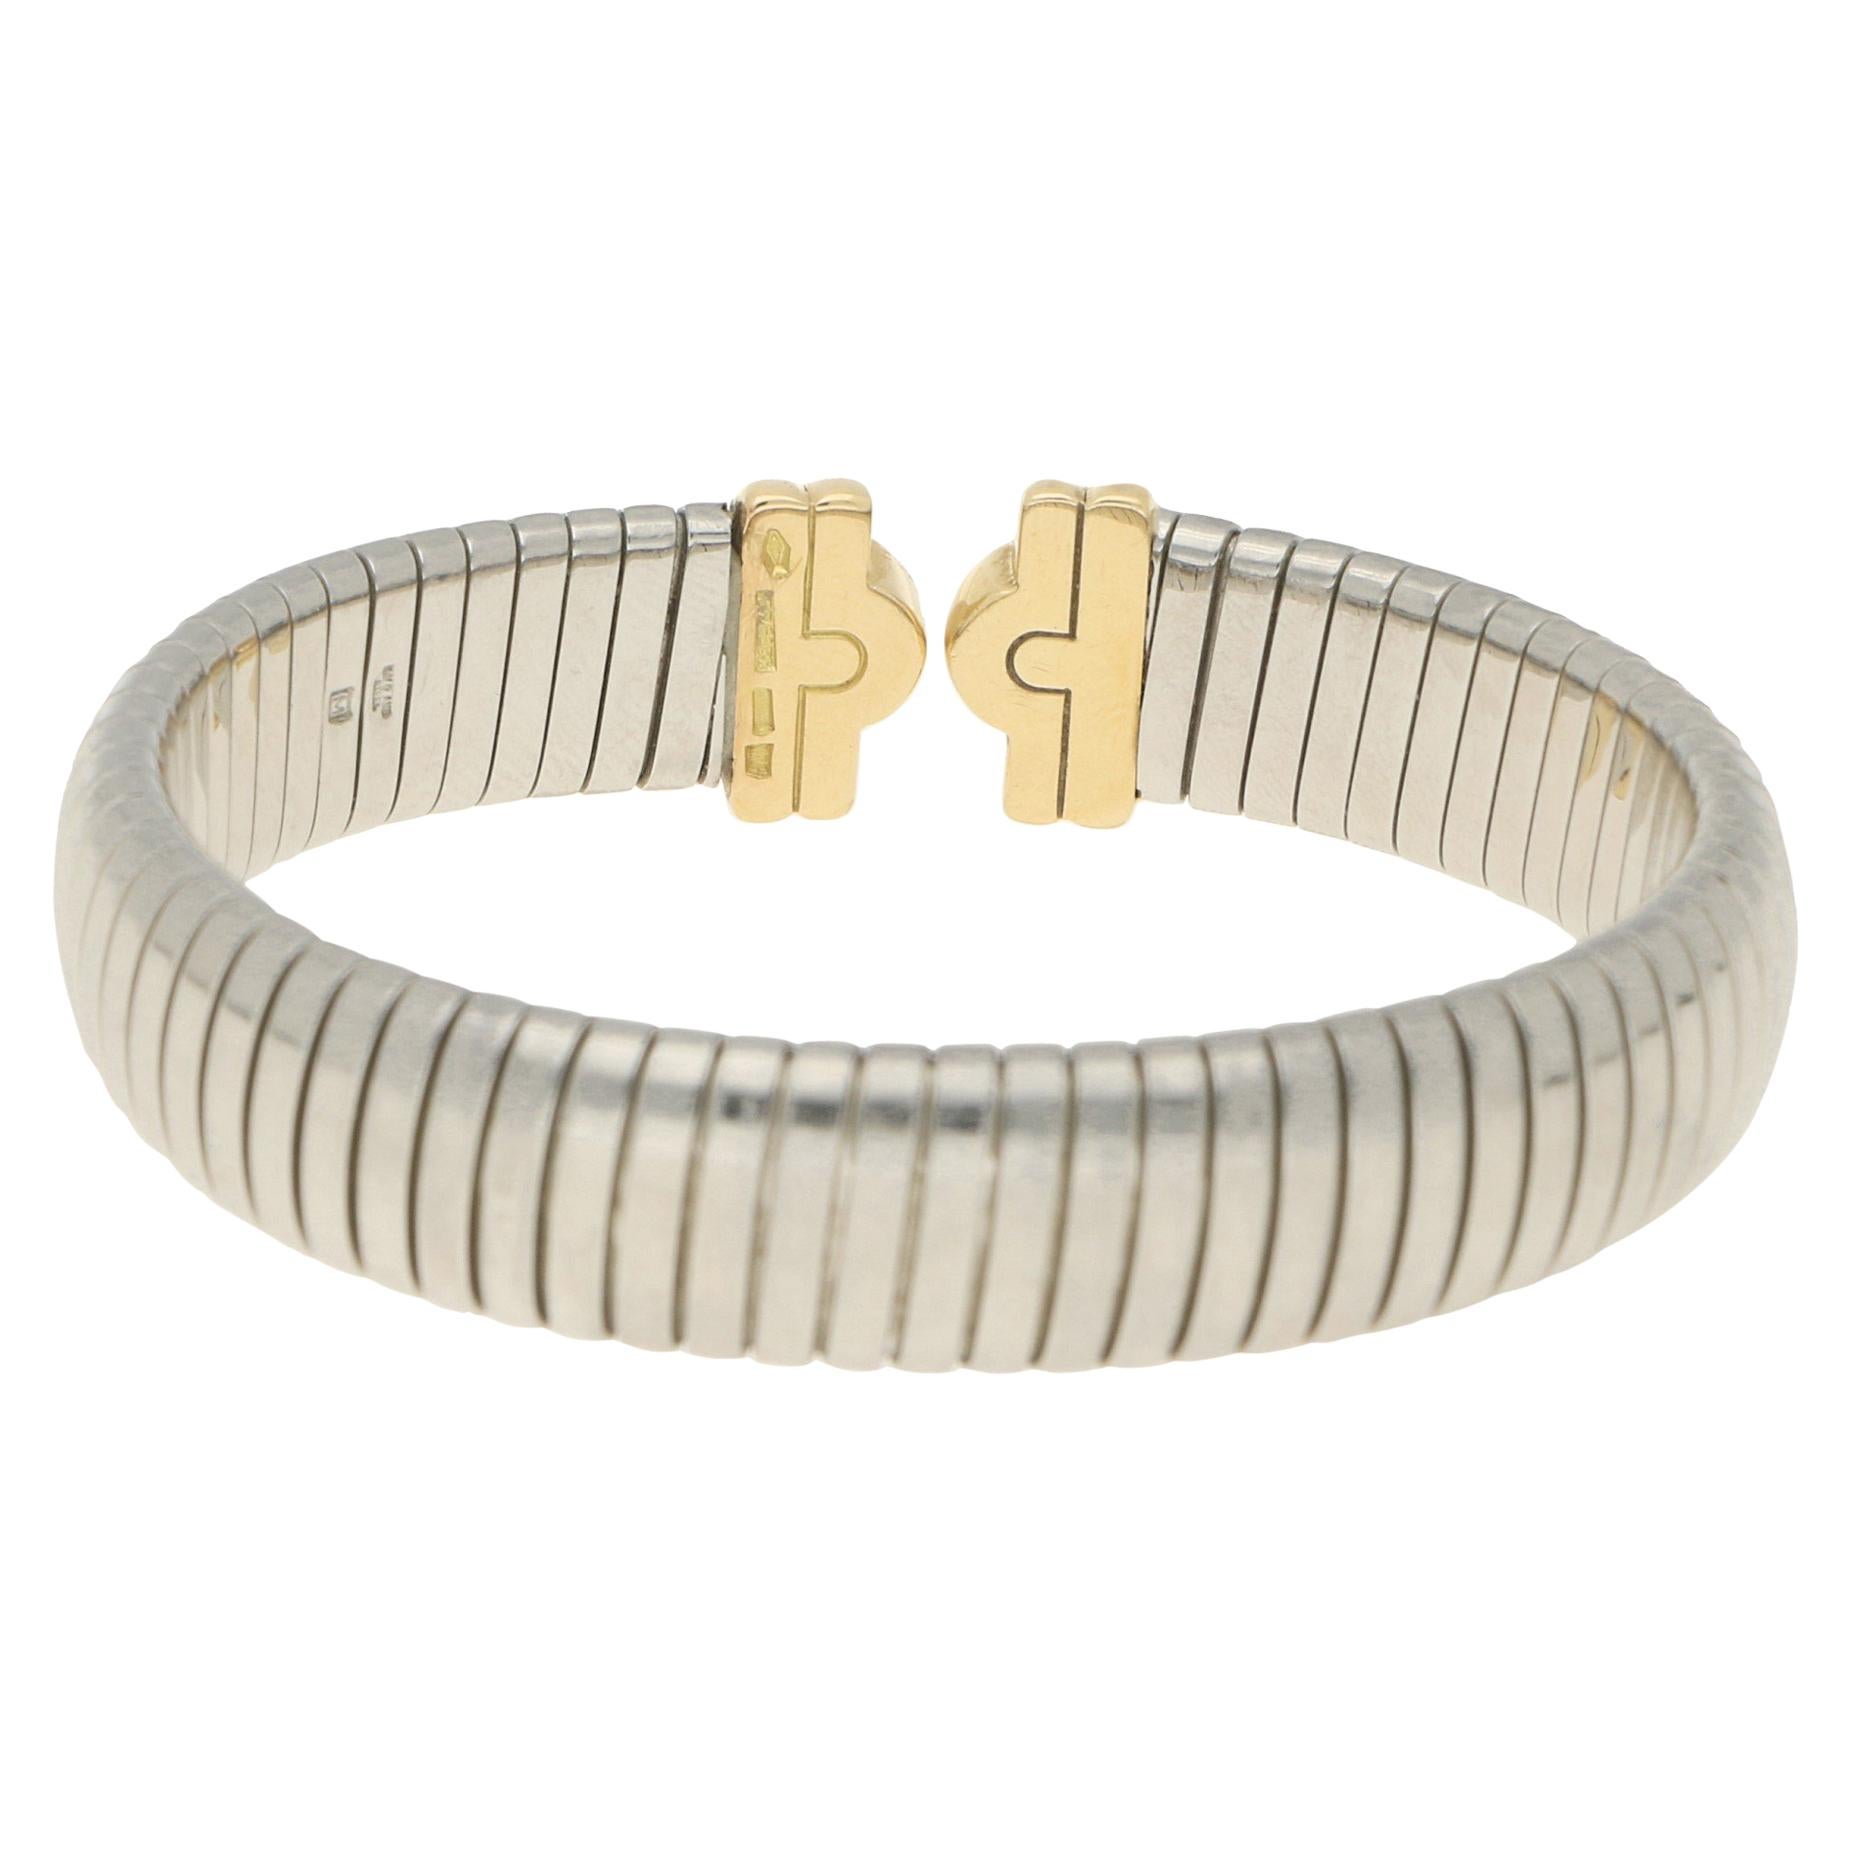 A vintage Bvlgari Parentesi diamond bangle bracelet in 18-karat yellow gold and stainless steel. From the brand's Parentesi collection, the bracelet is designed as a springy flat snake-link stainless steel bangle with Tubogas inspiration, leading to